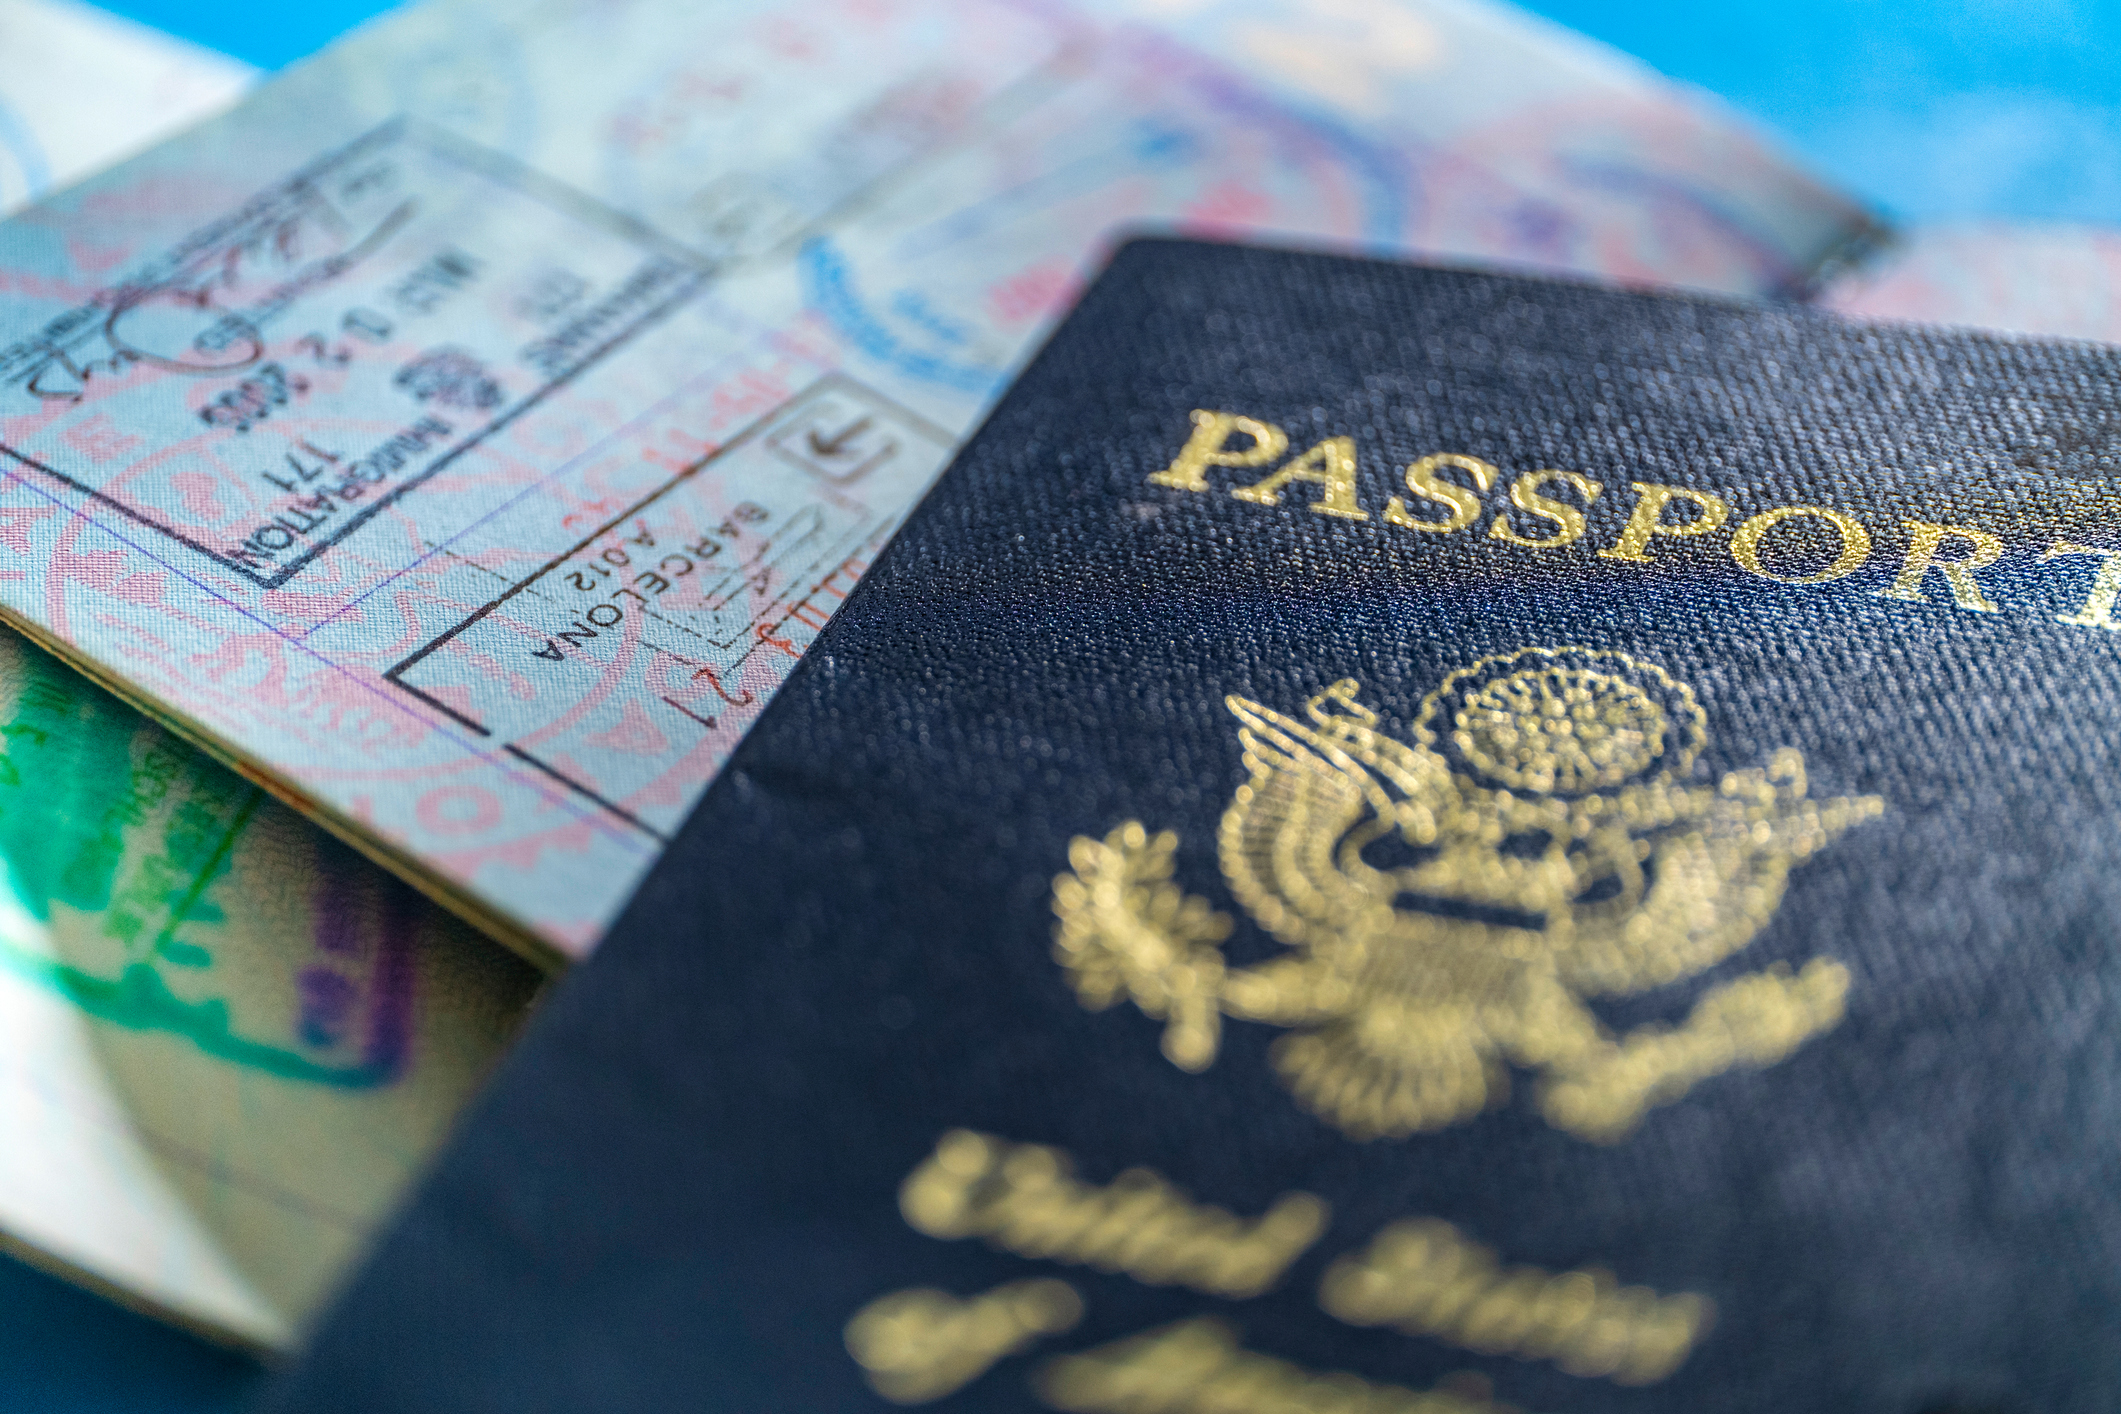 Americans Travelers Who Don’t Identify As Male Or Female Can Soon Mark ‘X’ On Passport